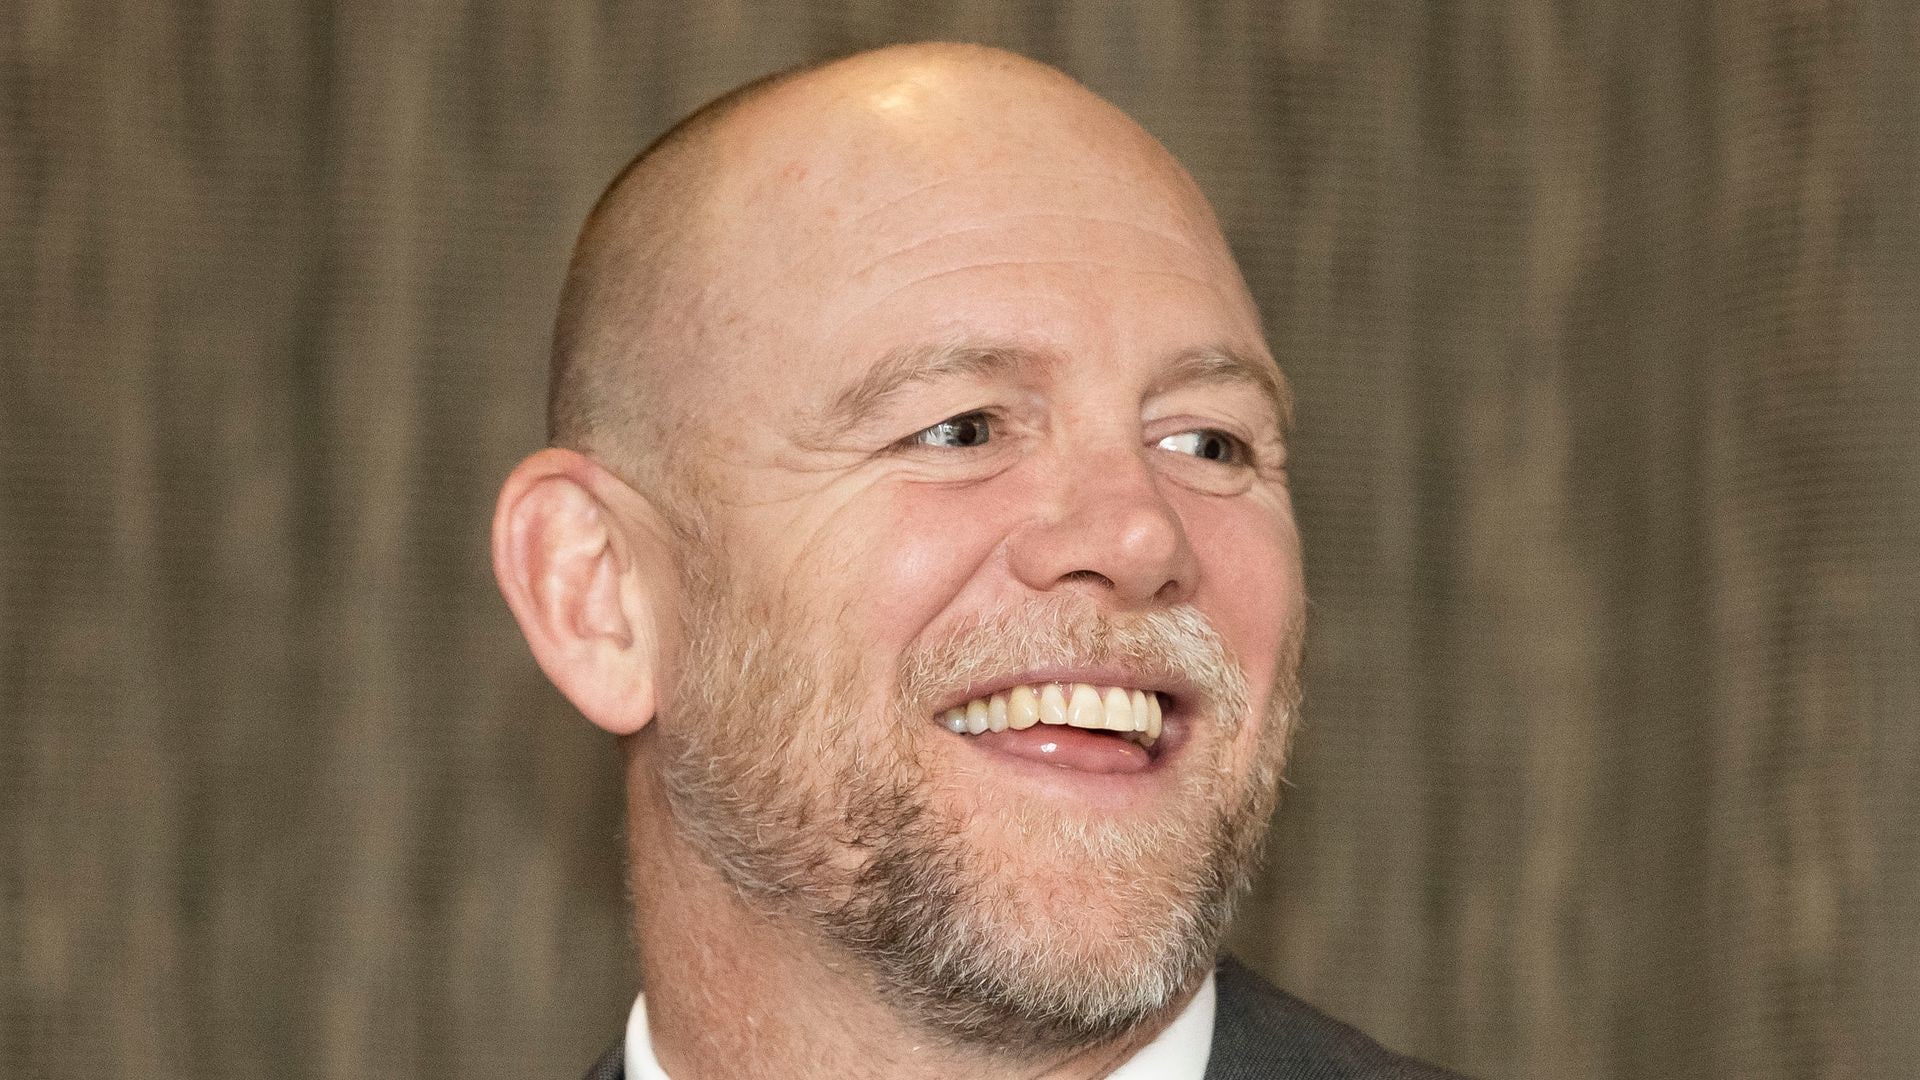 Mike Tindall smiling in a grey suit